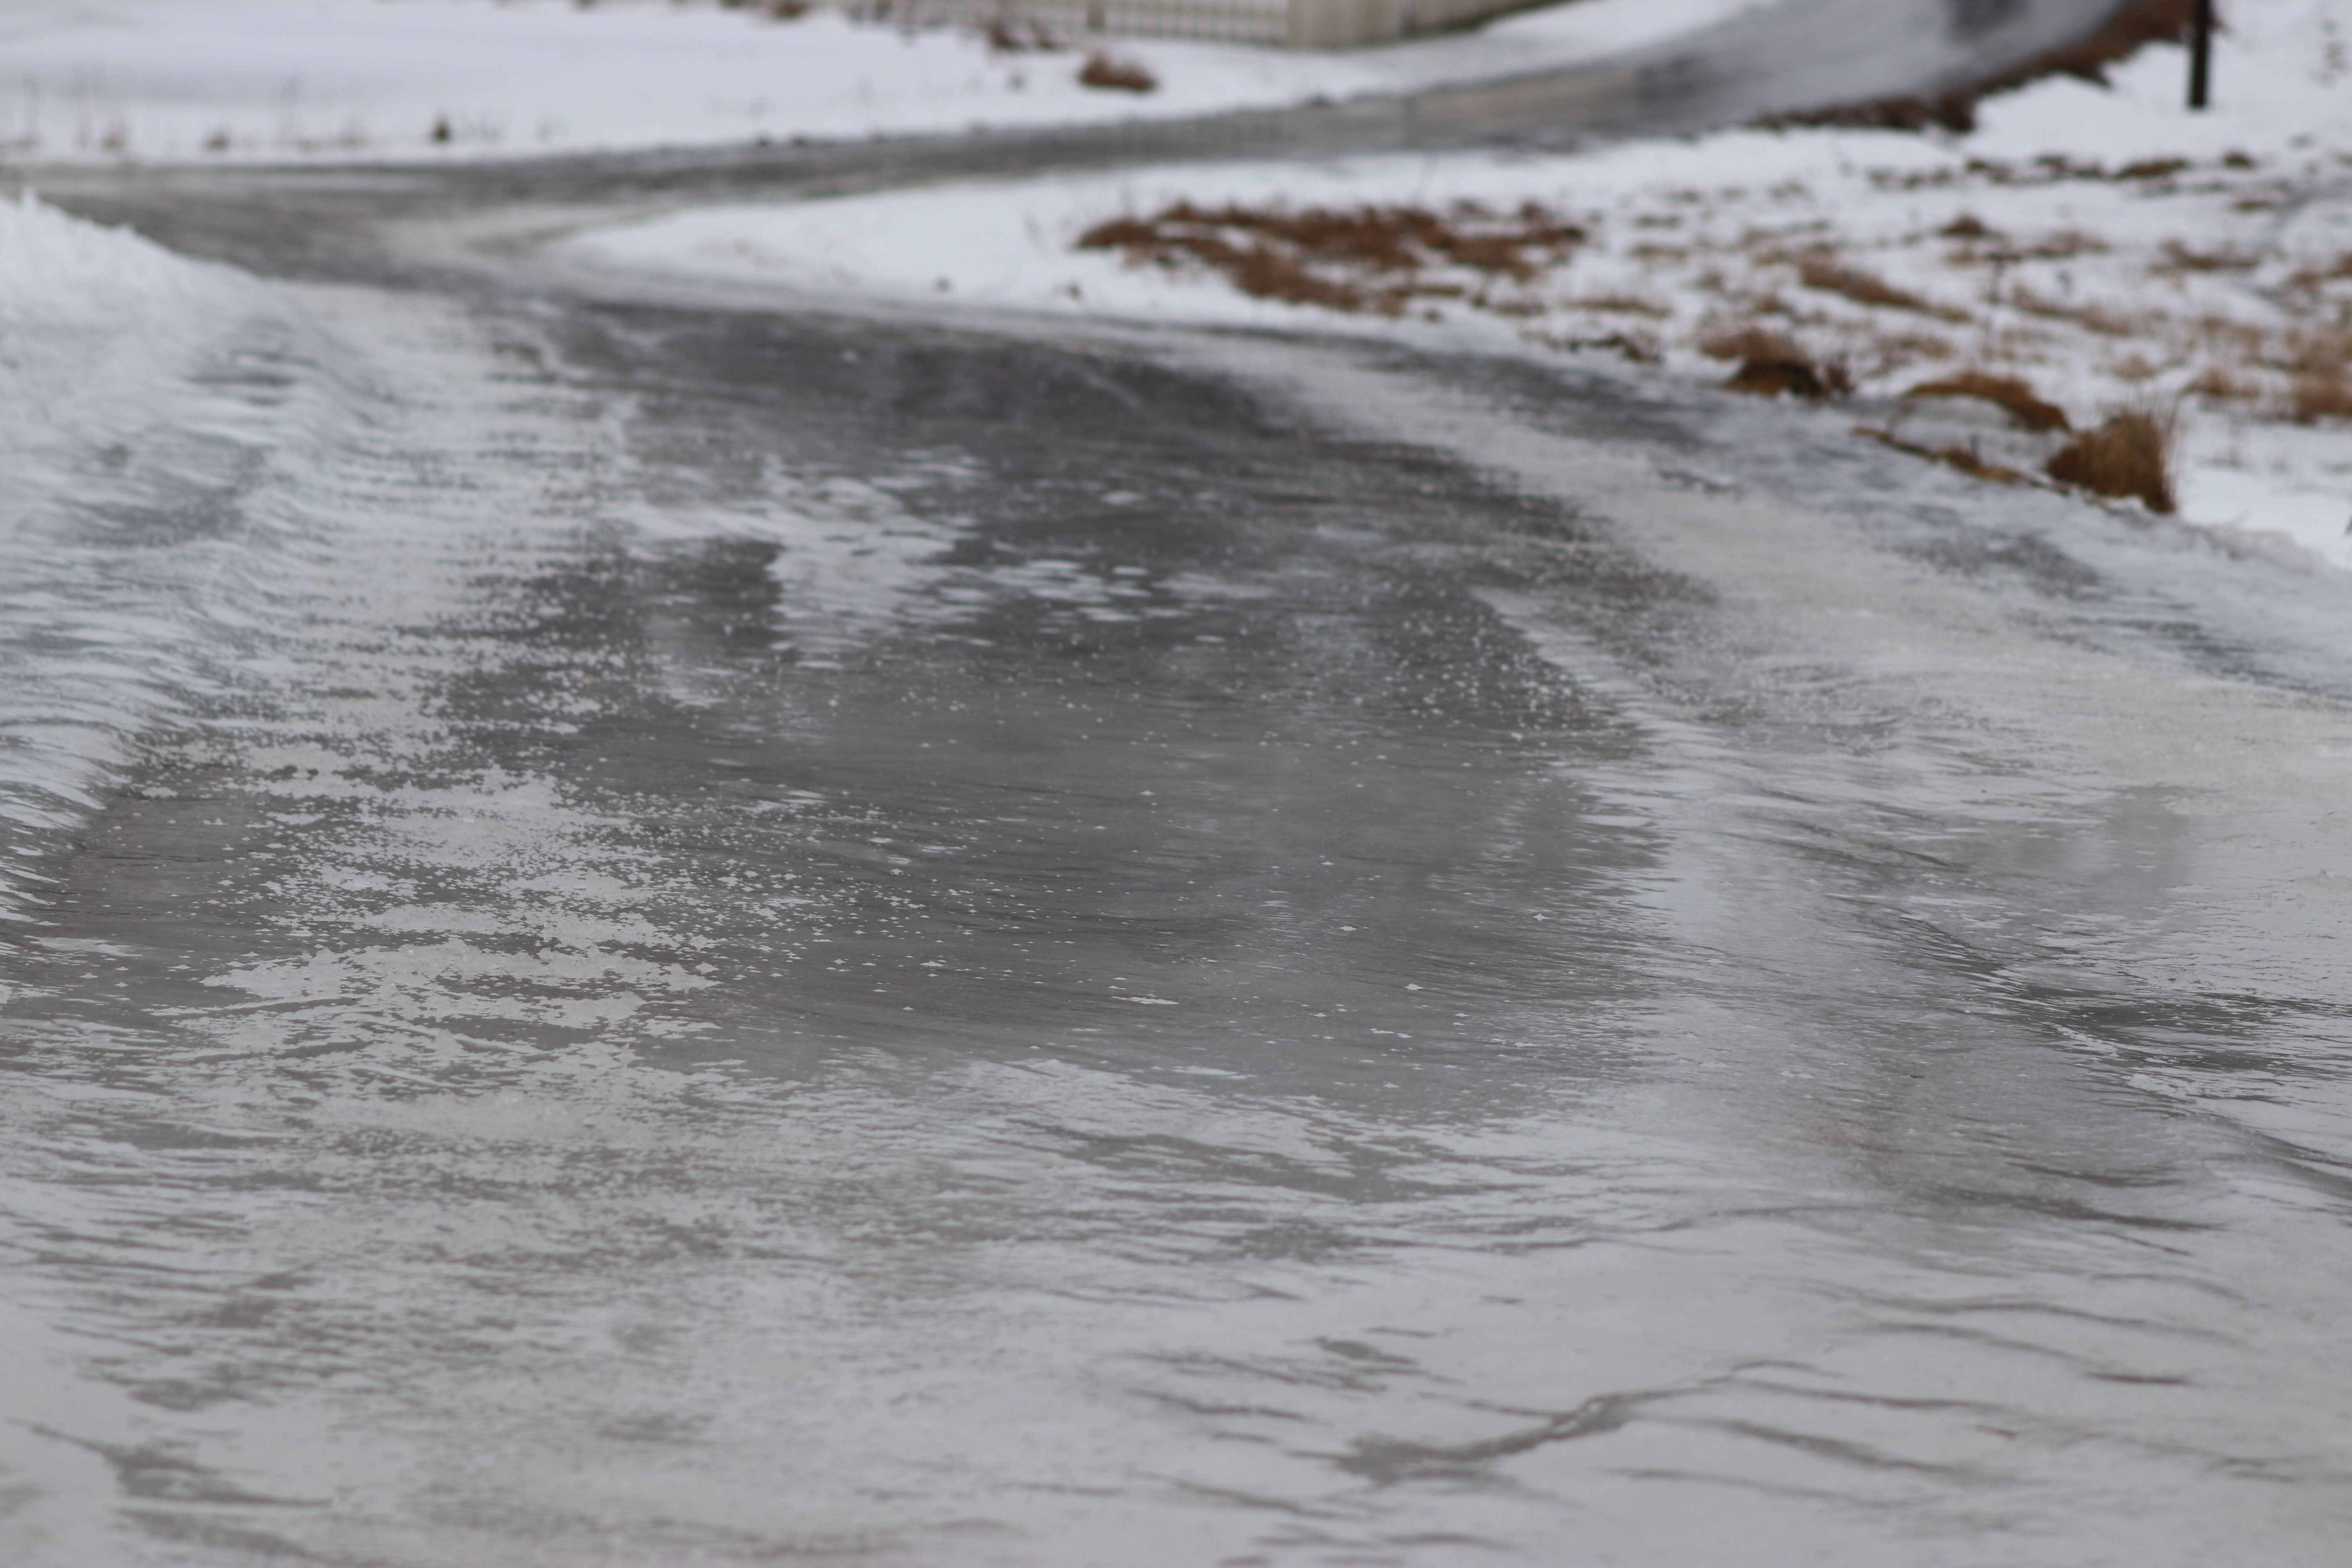 Warnings of dangerously slippery conditions – and more to come